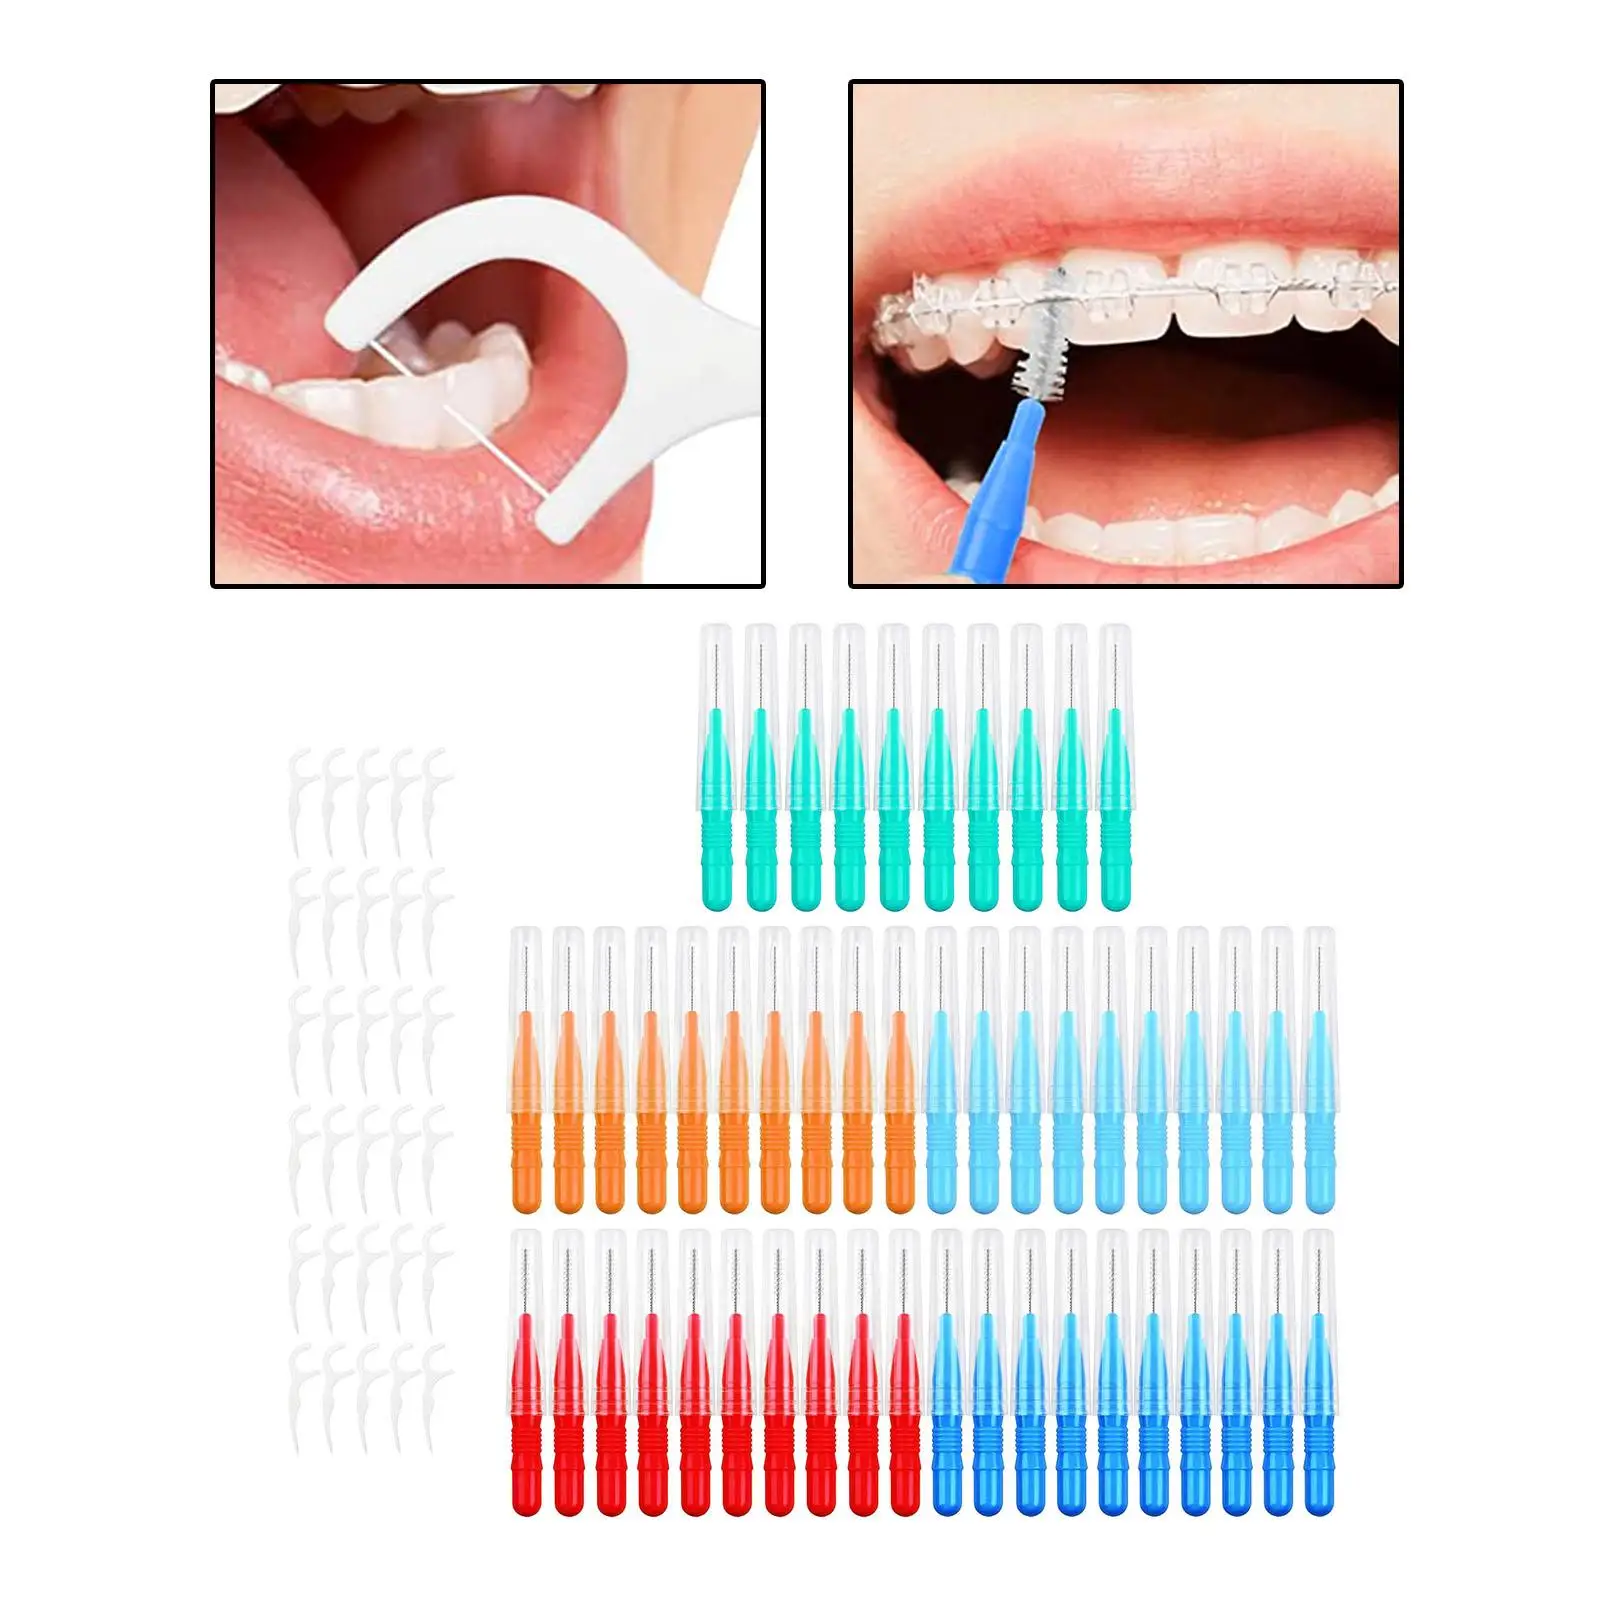 50Pcs Interdental Brushes 2mm 2.5mm 3mm for Removing Food and Plaque Between Teeth Portable 30x Floss Sticks Teeth Cleaners